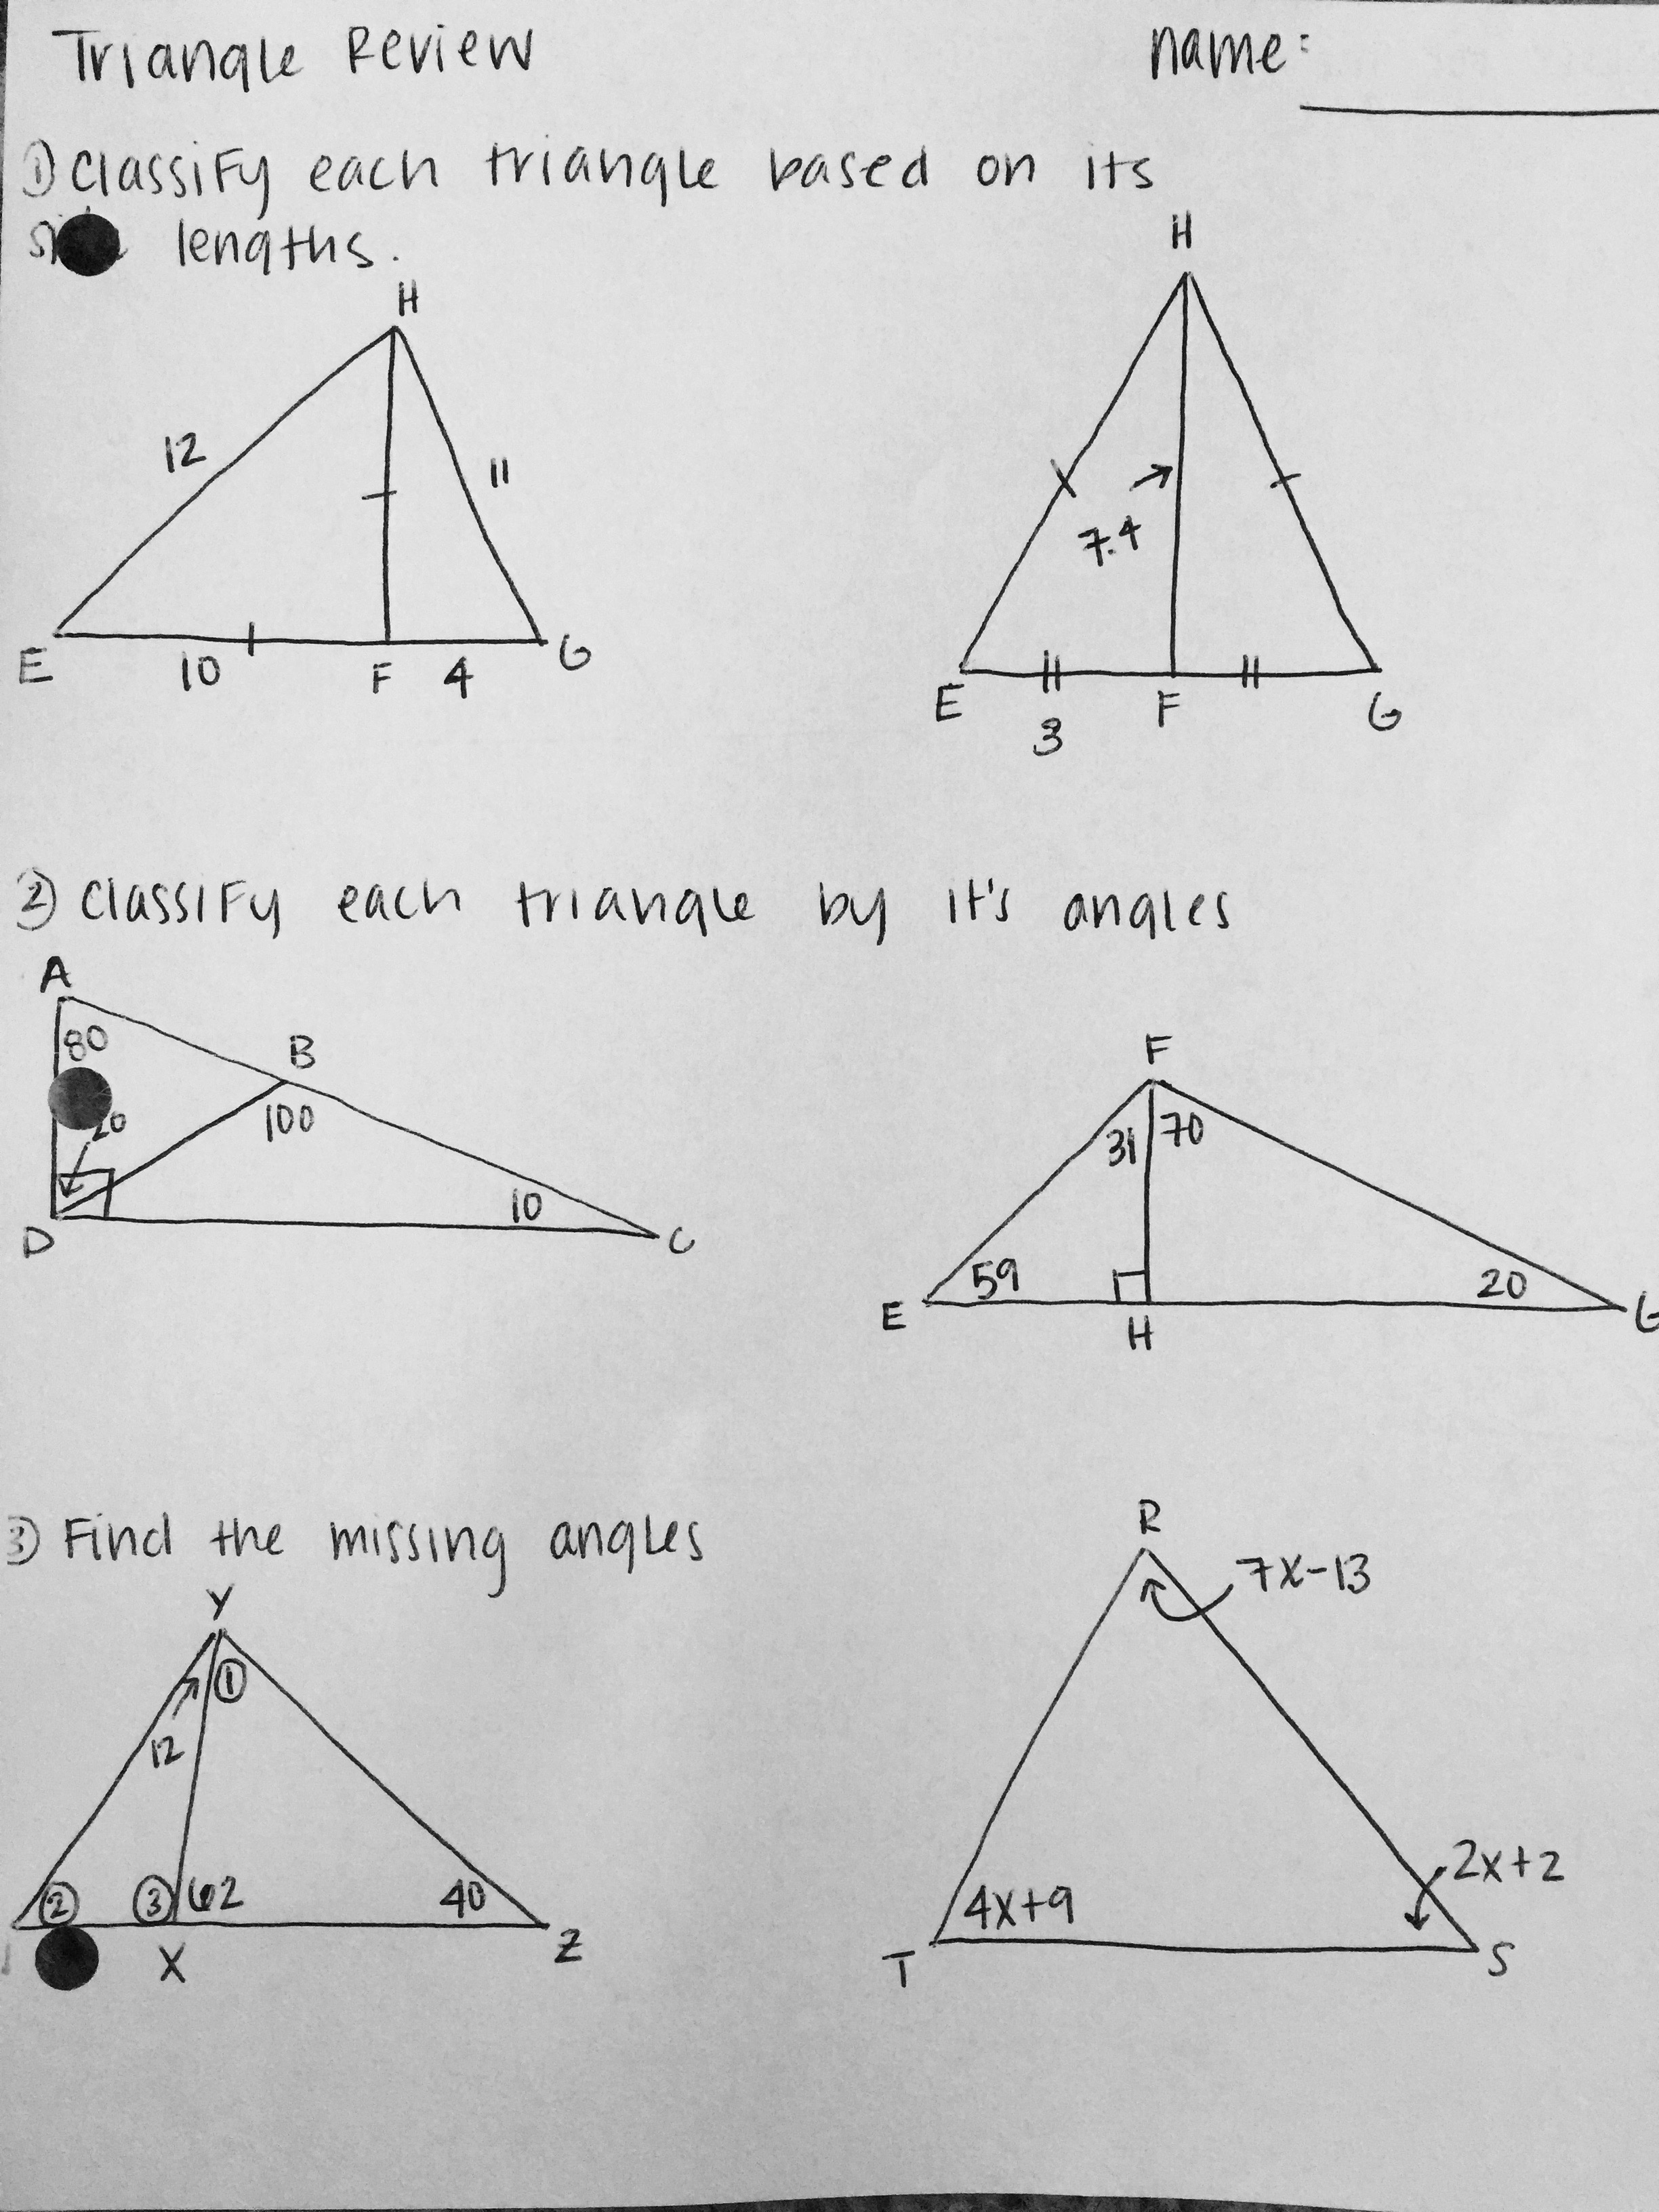 Solving right triangles word problems worksheet